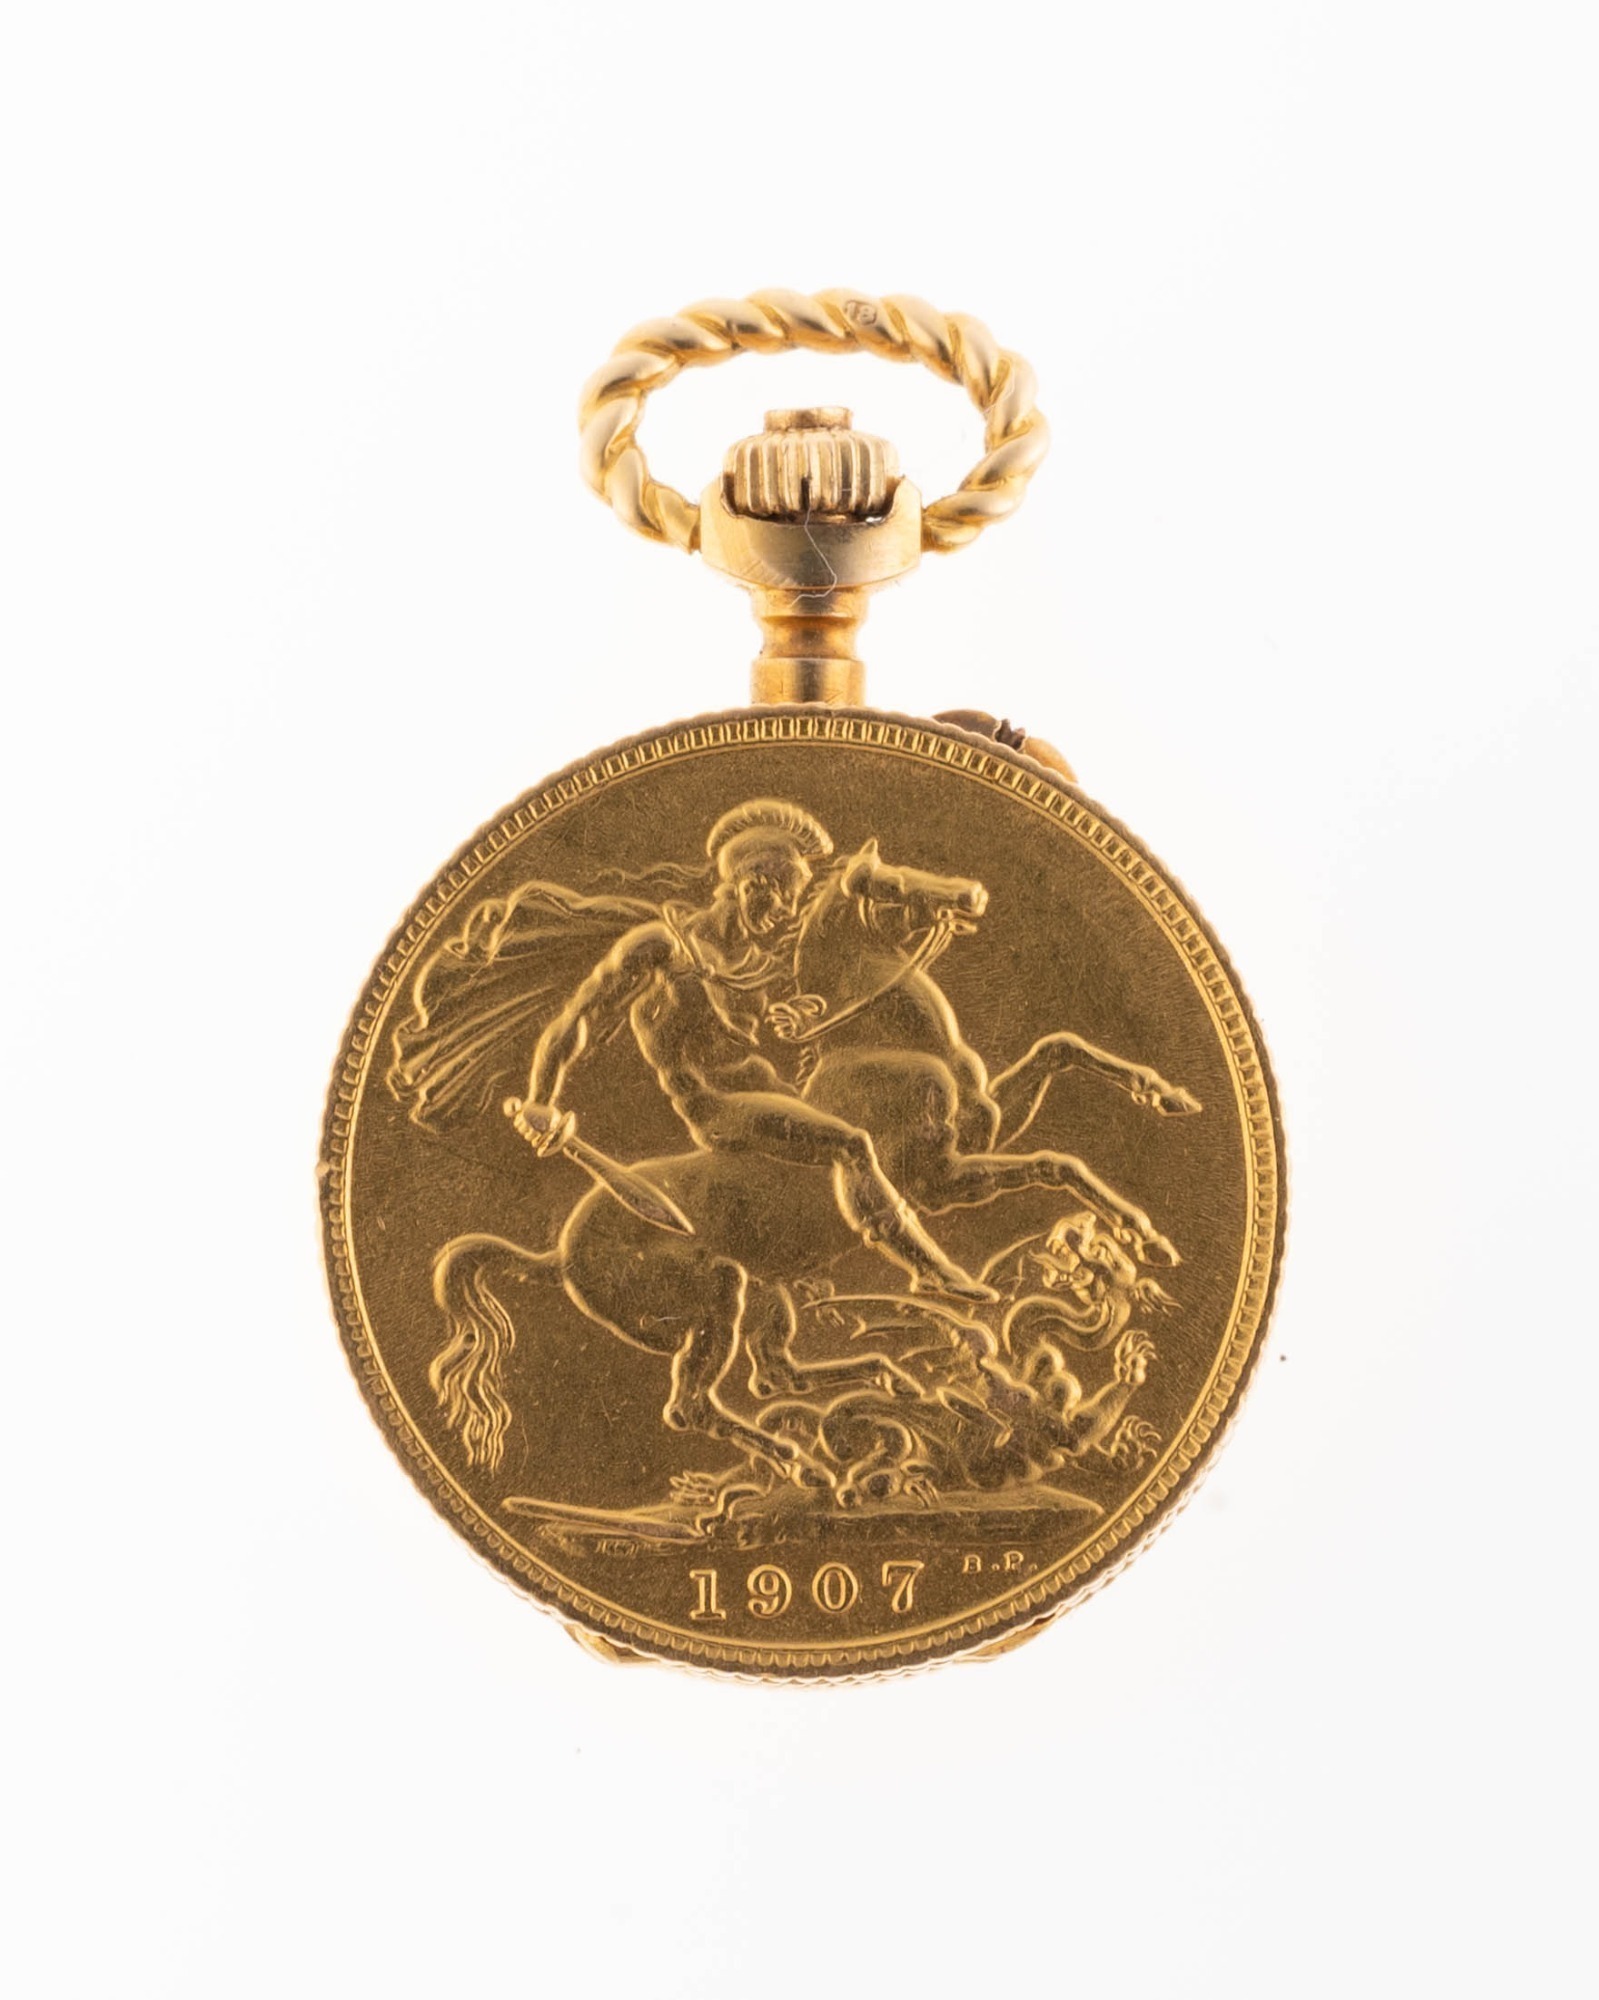 UNUSUAL GOLD SOVEREIGN PENDANT WATCH BY L. VRARD & CO.